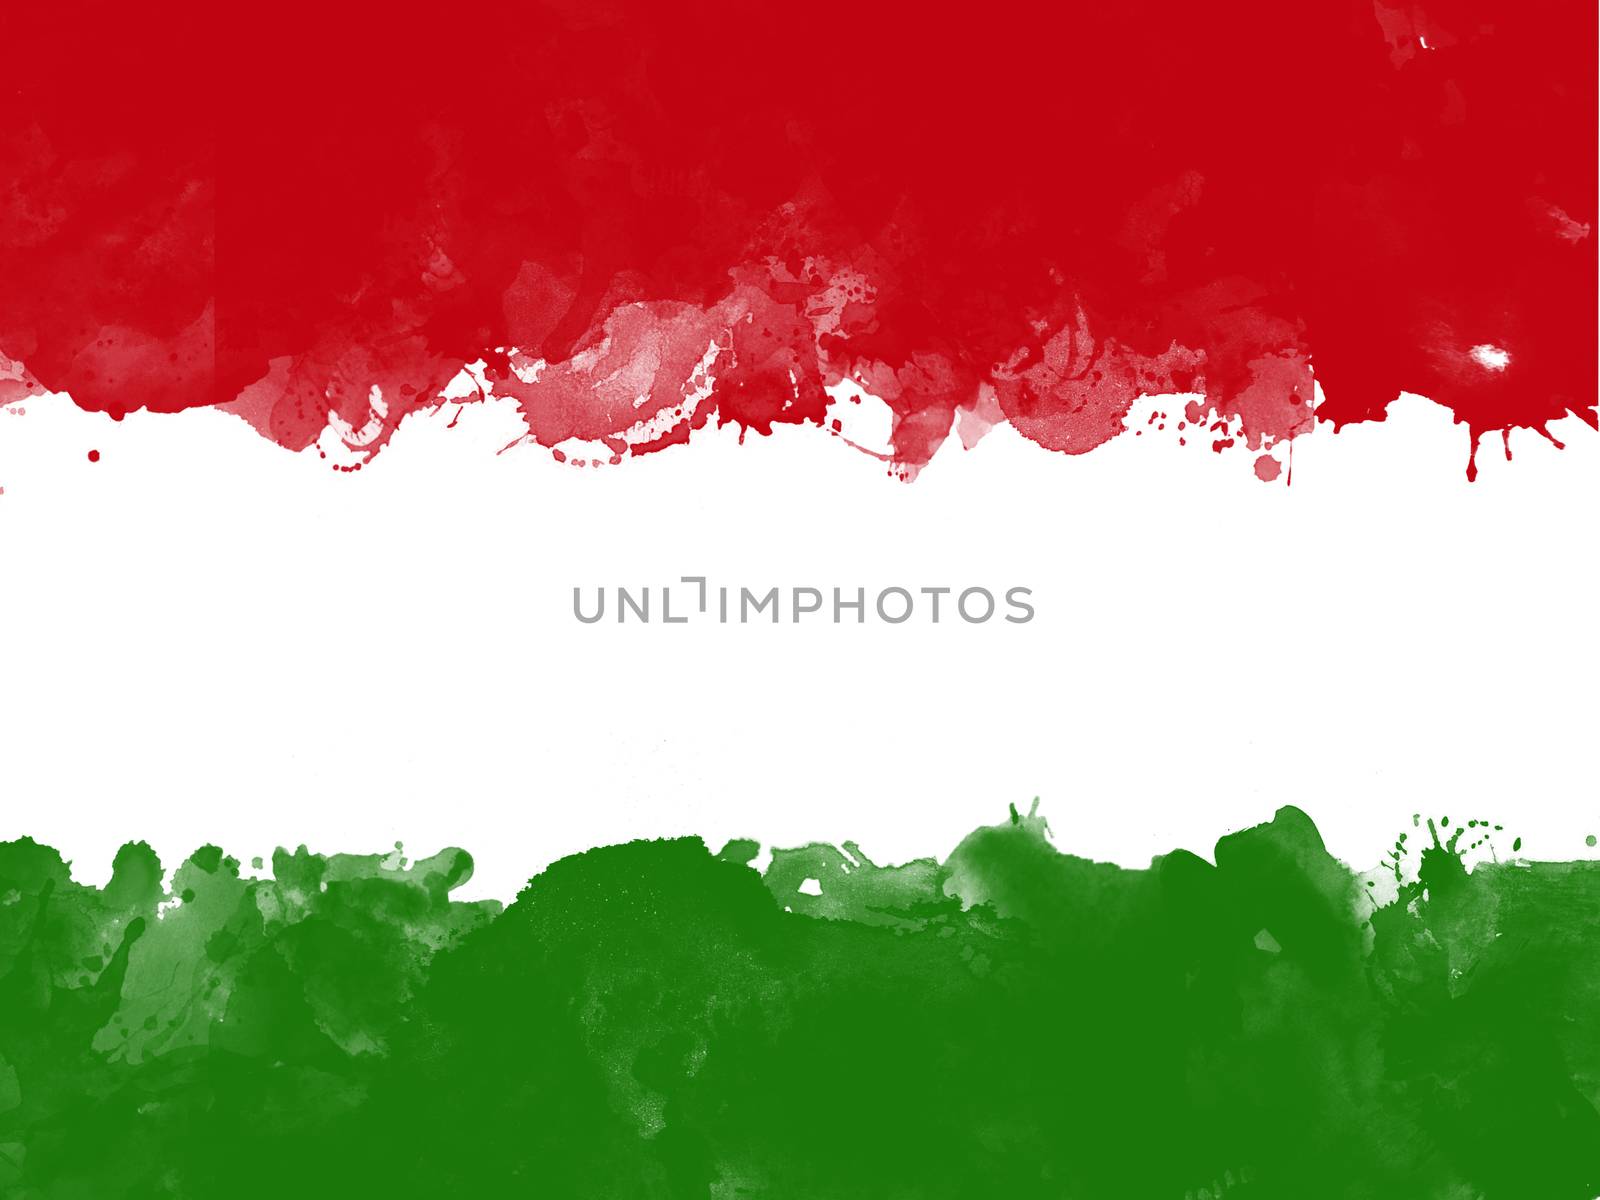 Flag of Hungary by watercolor paint brush, grunge style by asiandelight